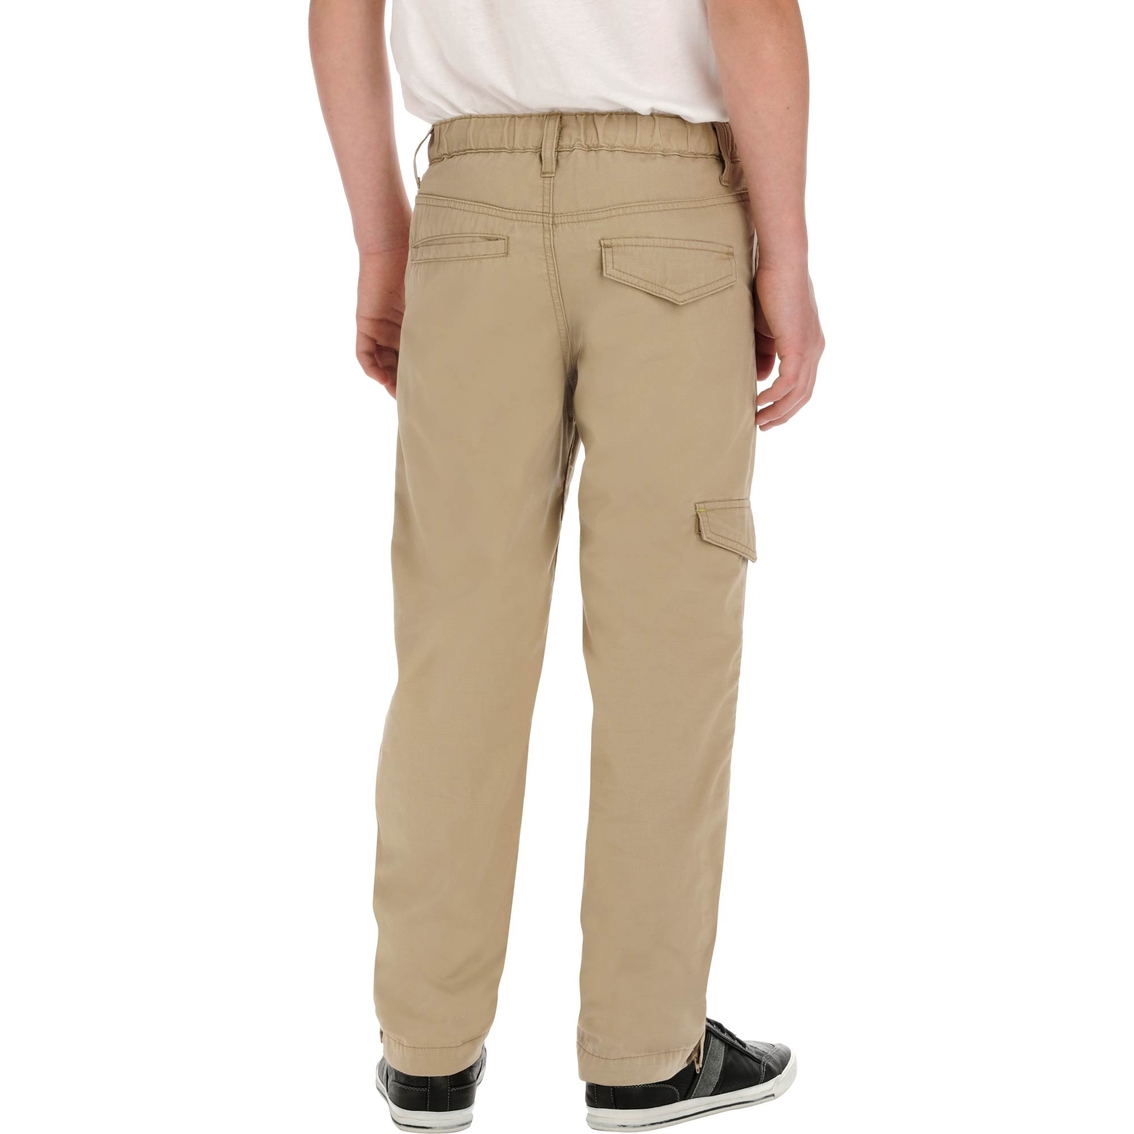 Lee Jeans Boys Sport Cargo Pants | Boys 8-20 | Clothing & Accessories ...